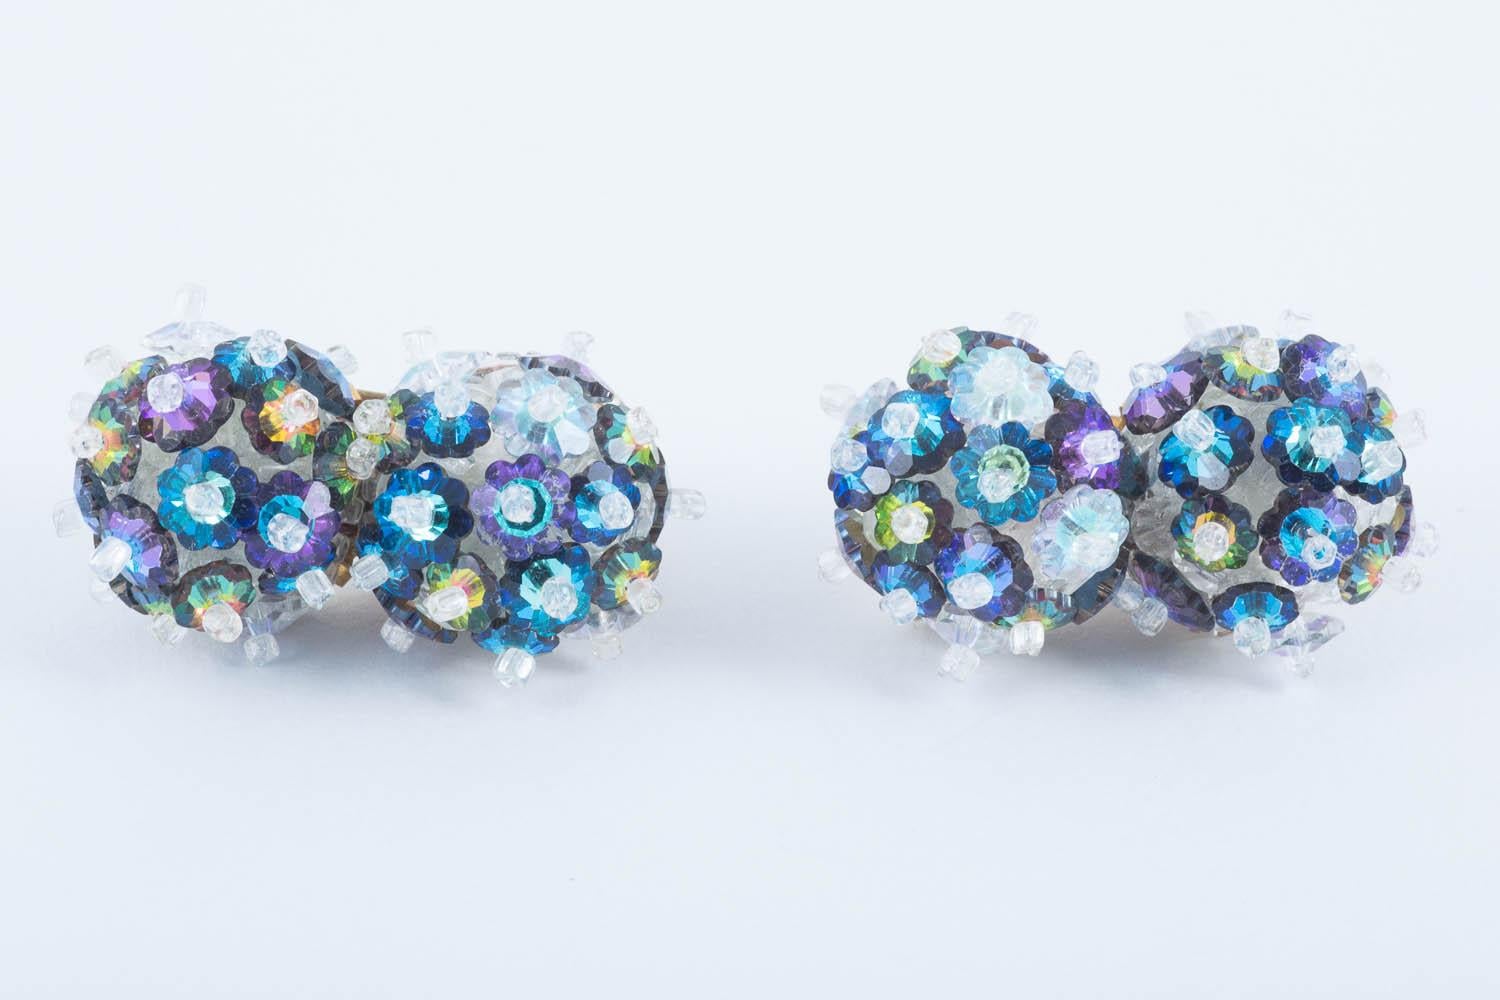 These earrings are everything we love about Lydia Coppola's work! Made from Swarovski 'Margarita' crystals mounted onto a weft of beads - incredible colour combinations, really interesting design and structure, light enough to be comfortable and in